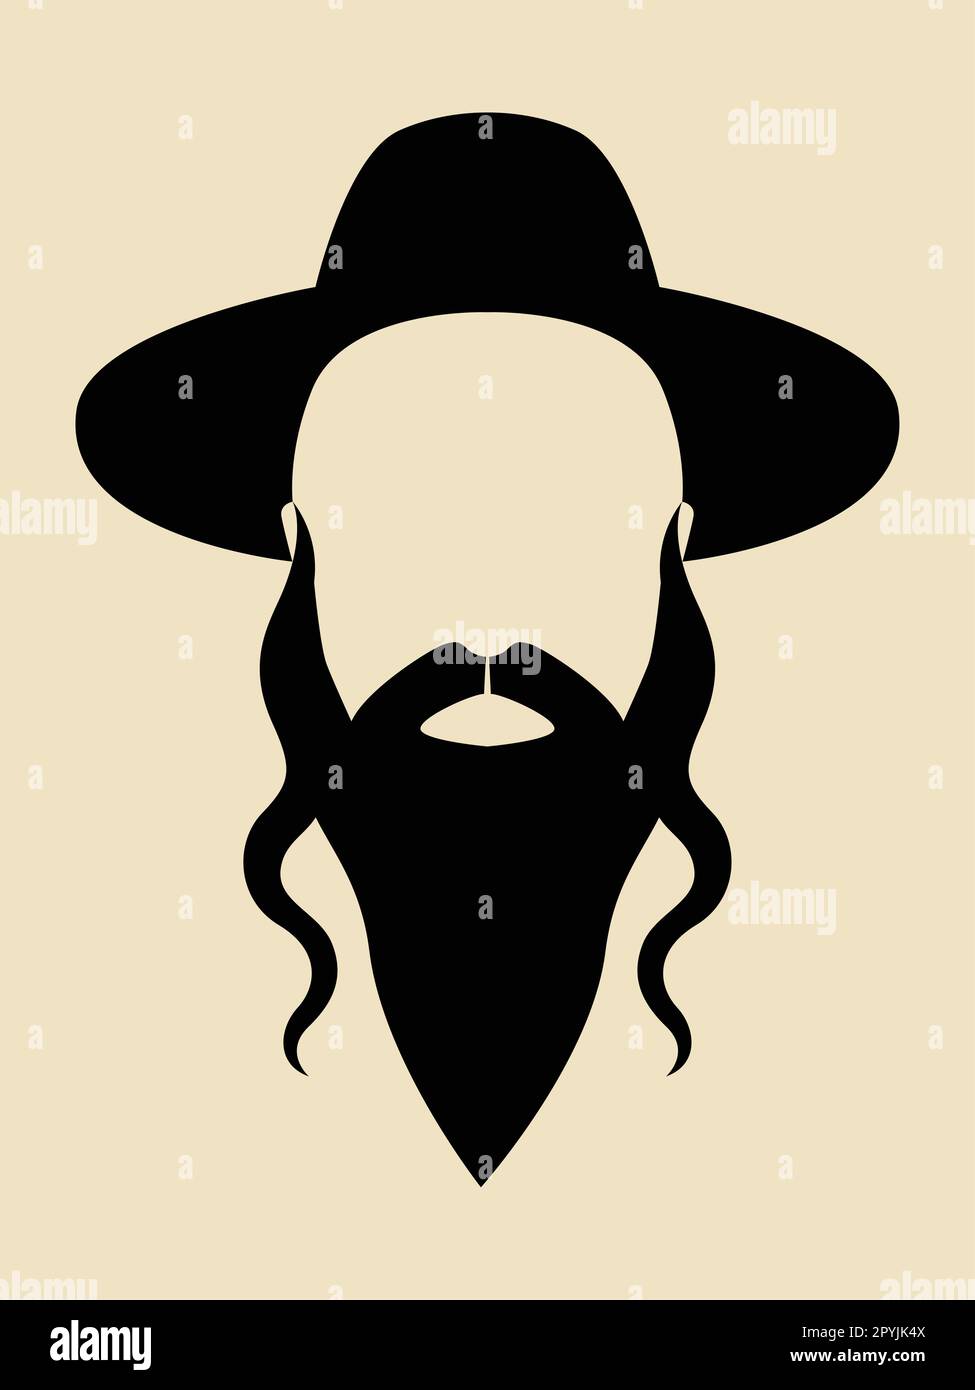 Simple graphic of a man with long beard wearing a hat Stock Vector